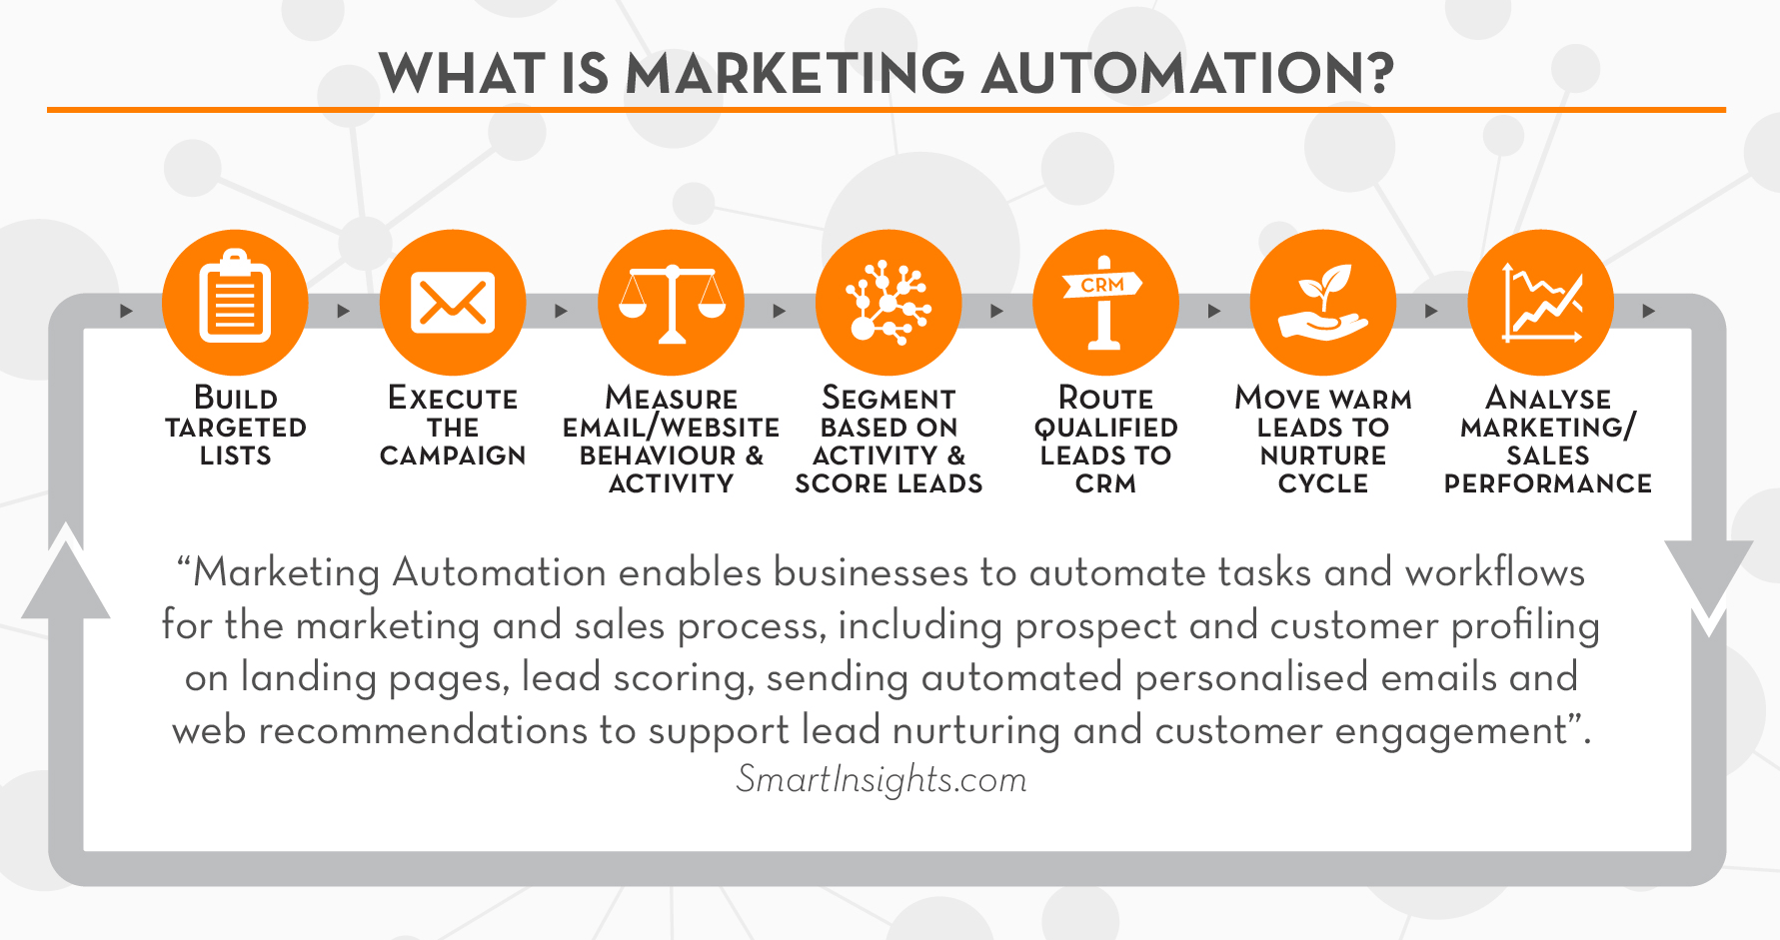 7 Ways B2b Marketing Automation Could Change Your Business